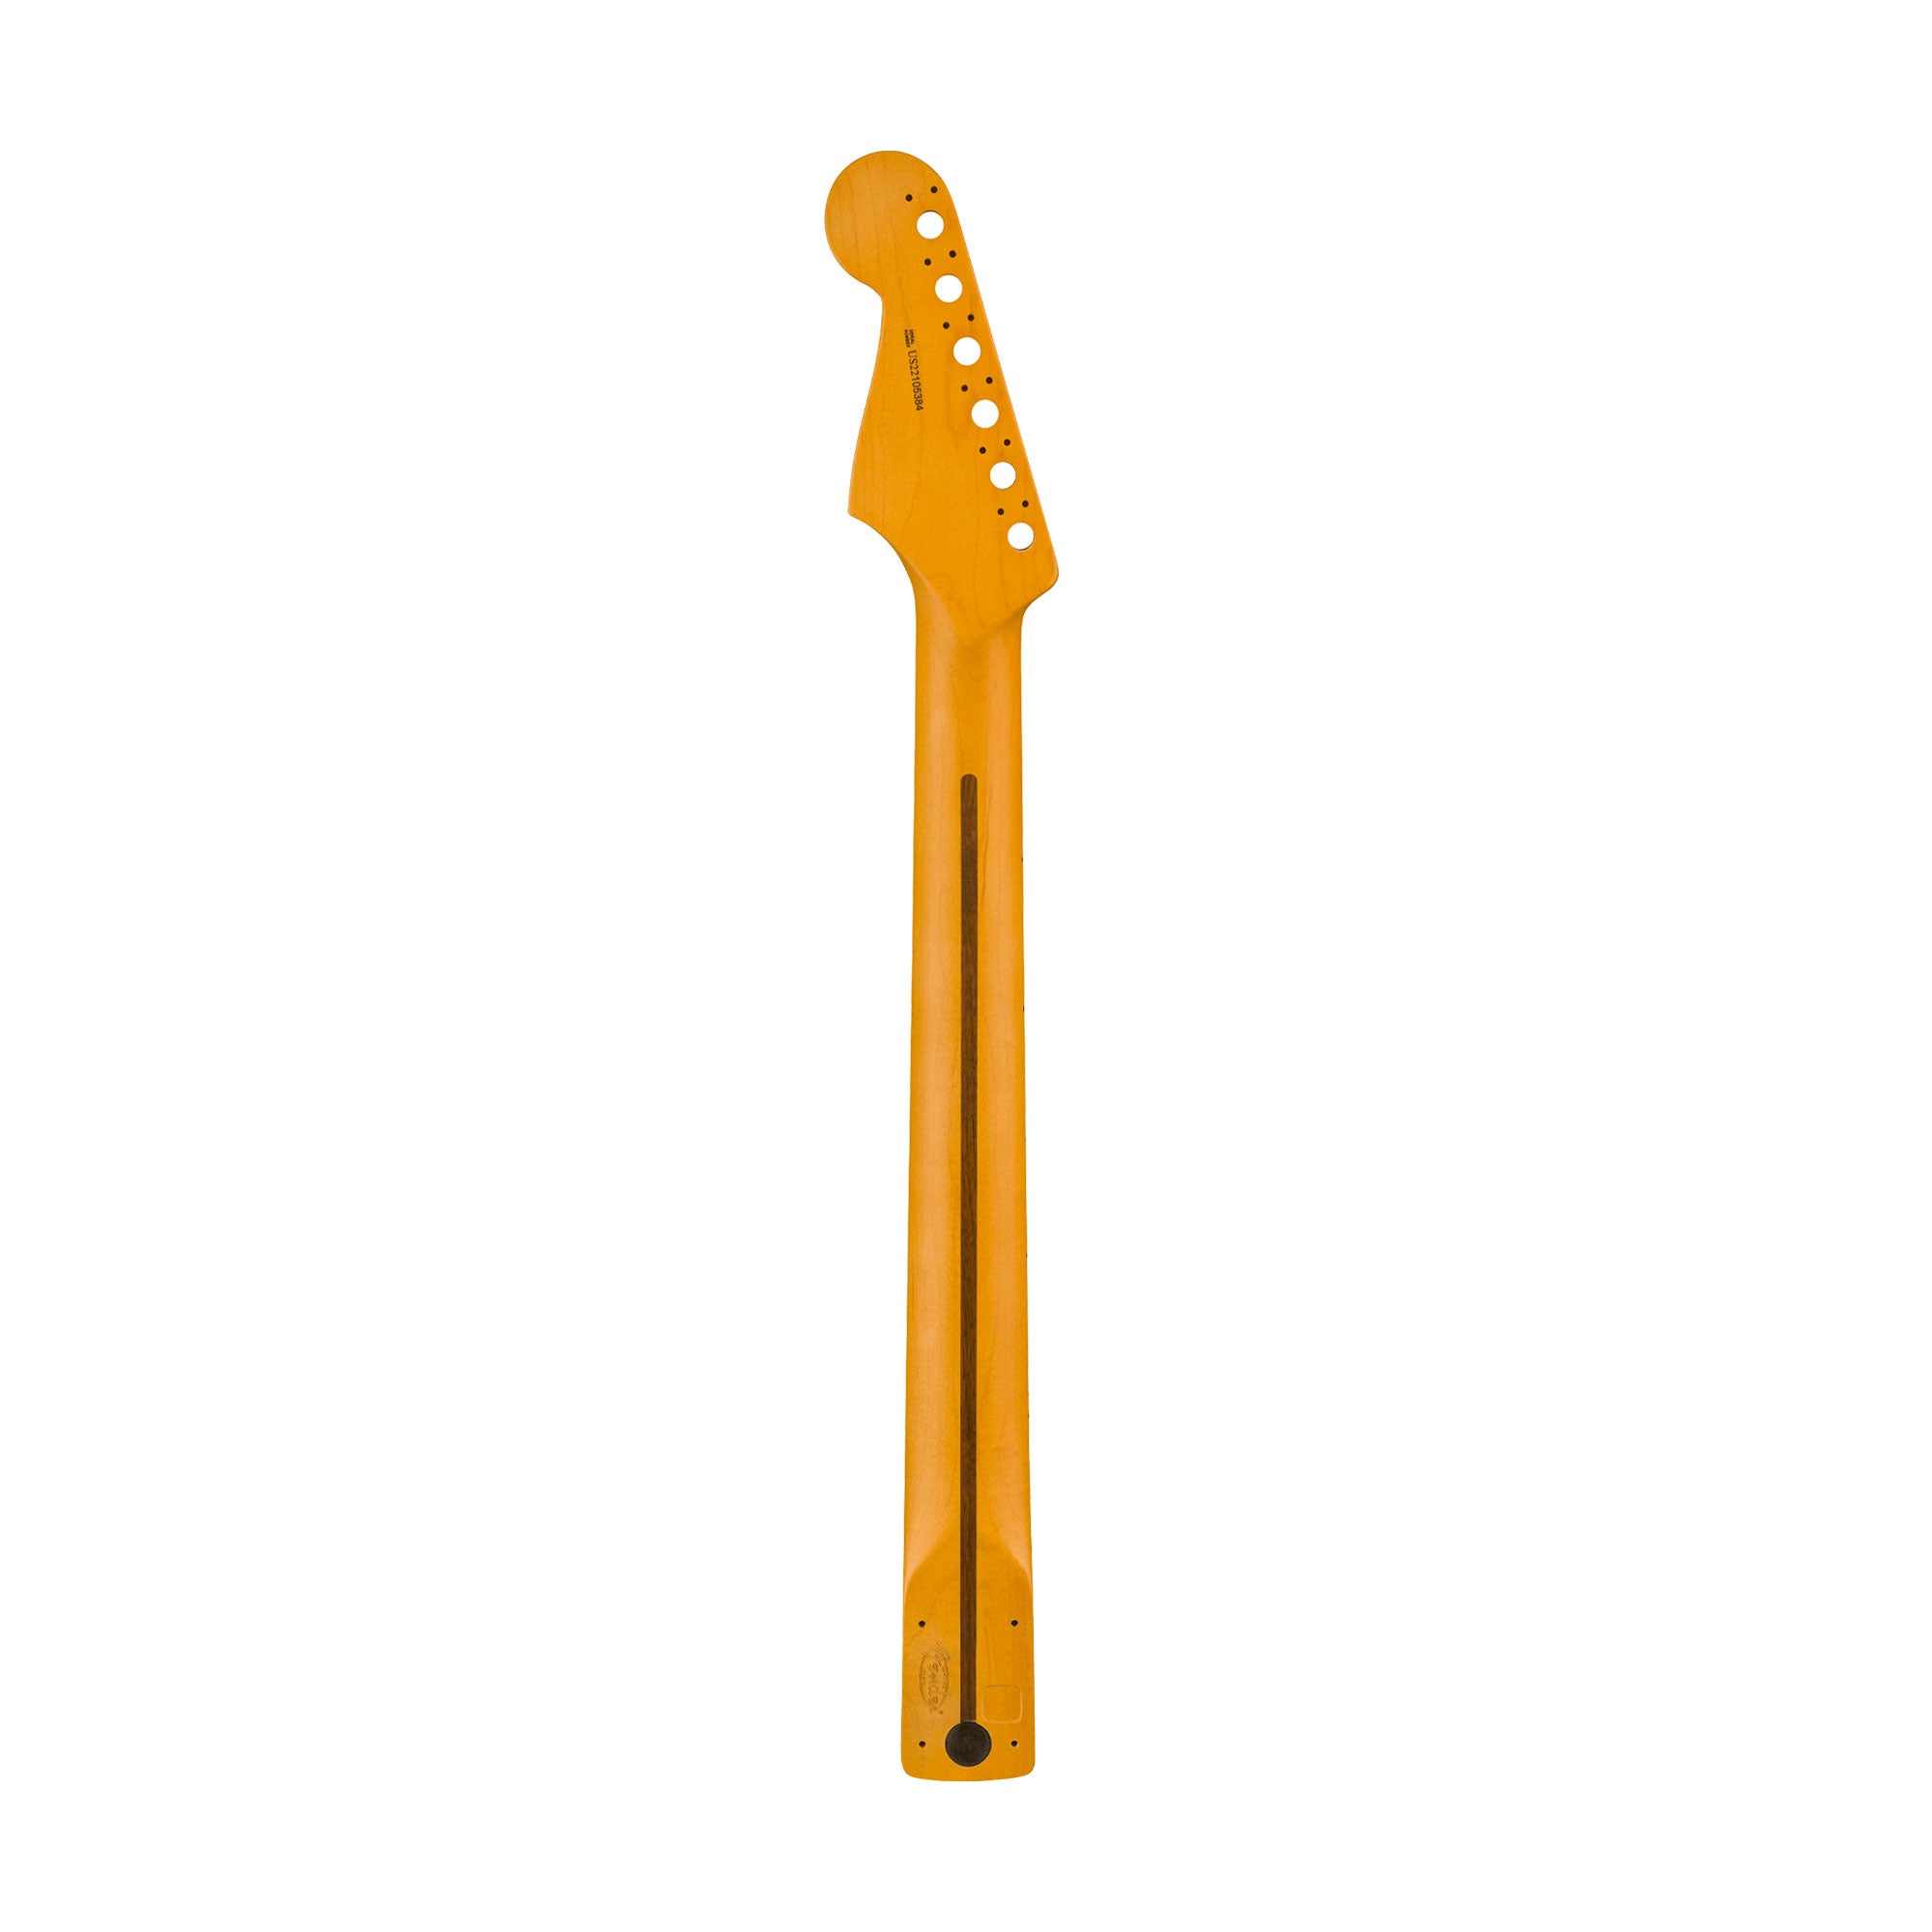 Fender American Professional II Scalloped Stratocaster Neck, 22 Narrow Tall Frets, 9.5